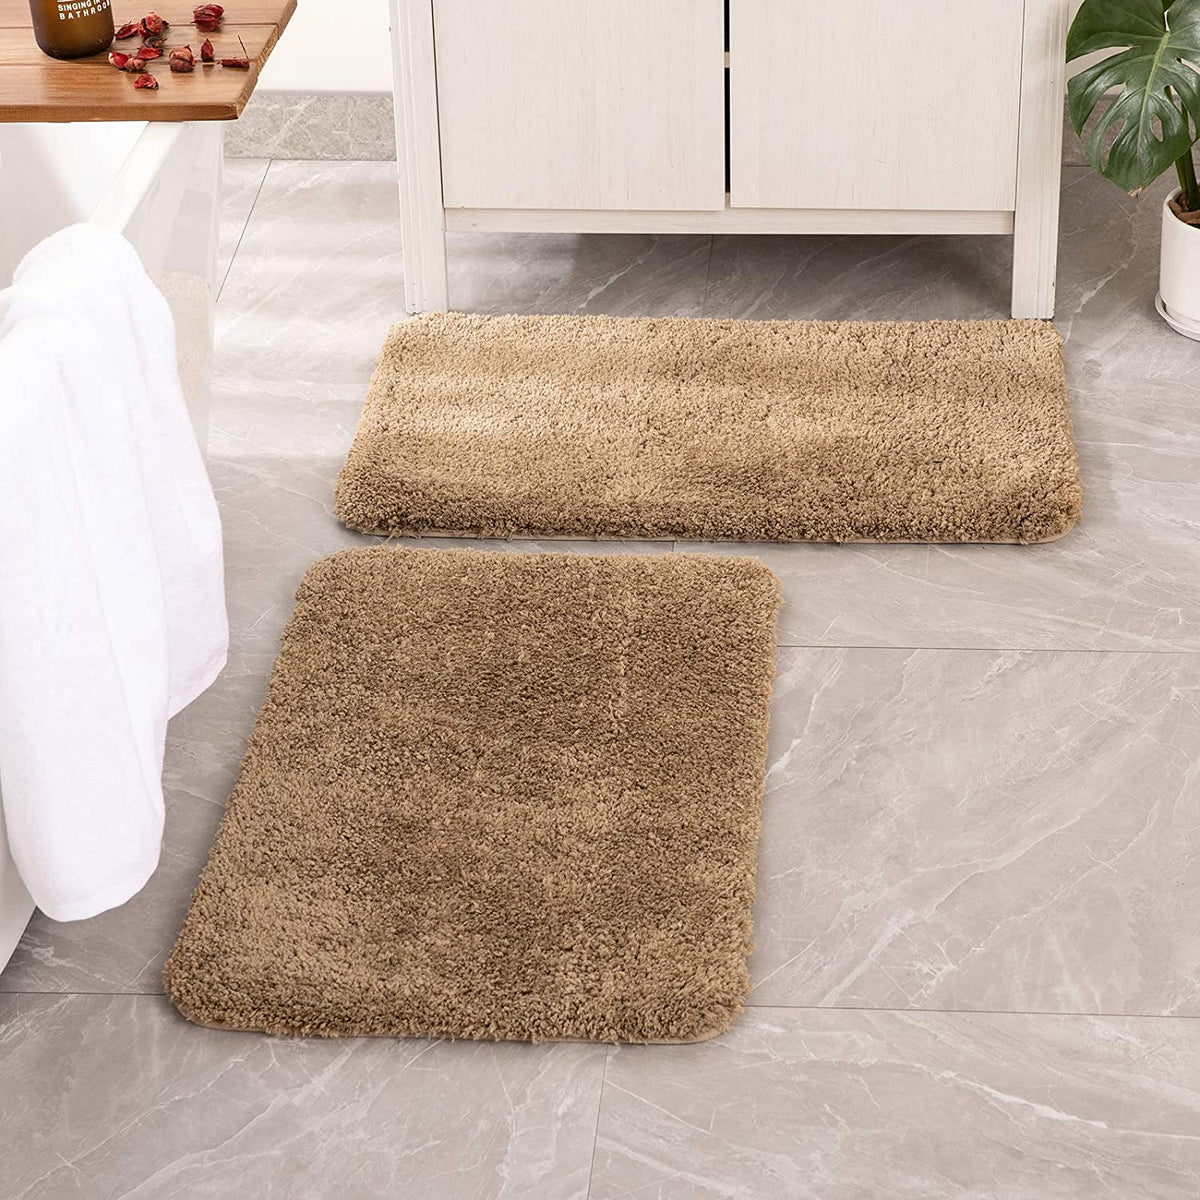 Loopsun Rugs Bathroom Rug,Soft And Comfortable,Puffy And Durable Thick Bath  Mat,Machine Washable Bathroom Mats,Non-Slip Bathroom Rugs For Shower And